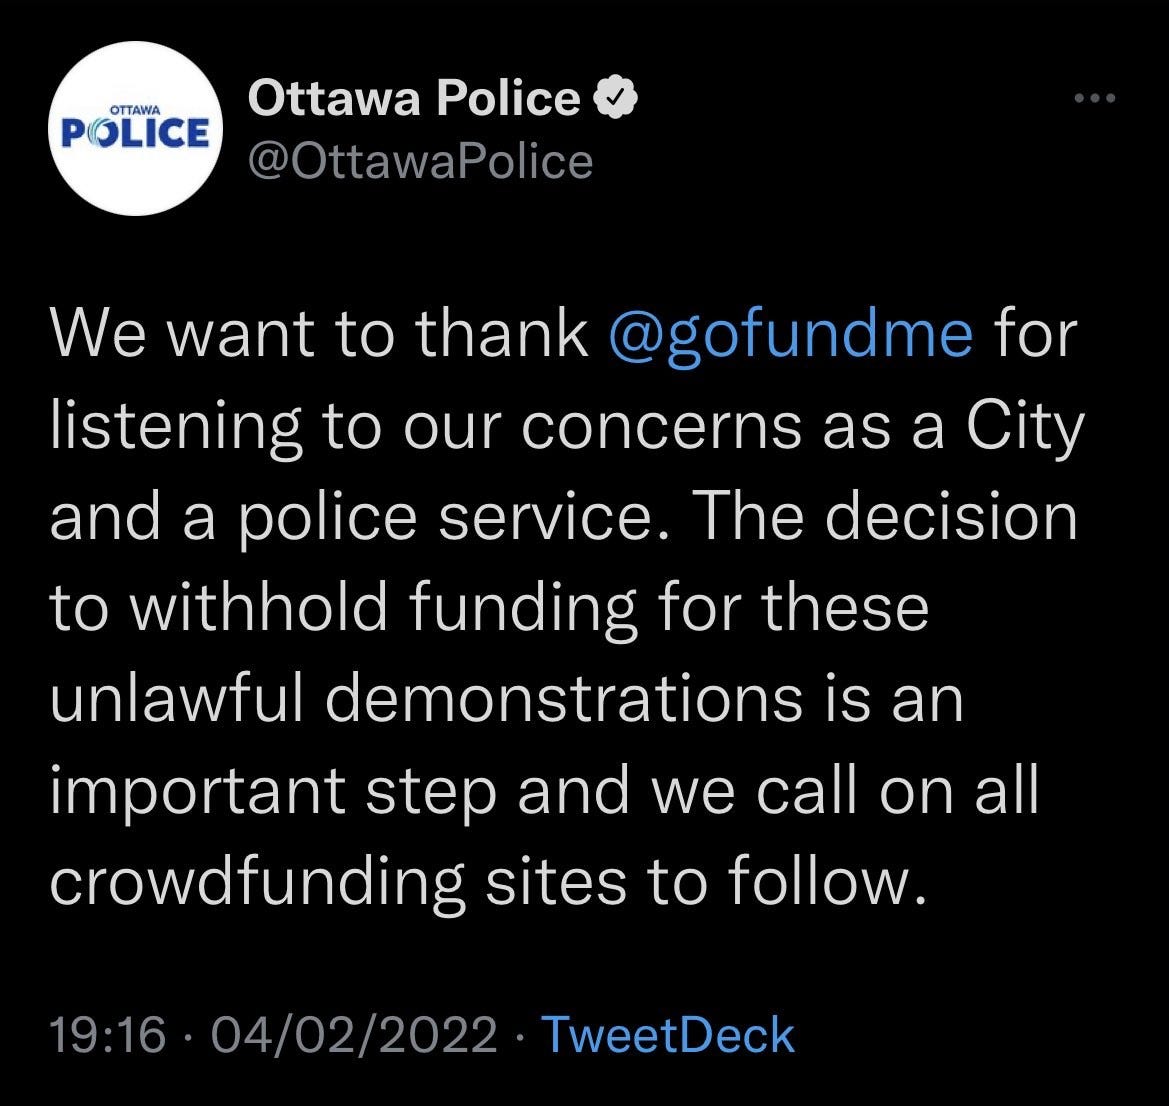 Ottawa Police 
OTTAWA 
POLICE 
@OttawaPolice 
@gofundme for 
We want to thank 
listening to our concerns as a City 
and a police service. The decision 
to withhold funding for these 
unlawful demonstrations is an 
important step and we call on all 
crowdfunding sites to follow. 
19:16 • 04/02/2022 • TweetDeck 